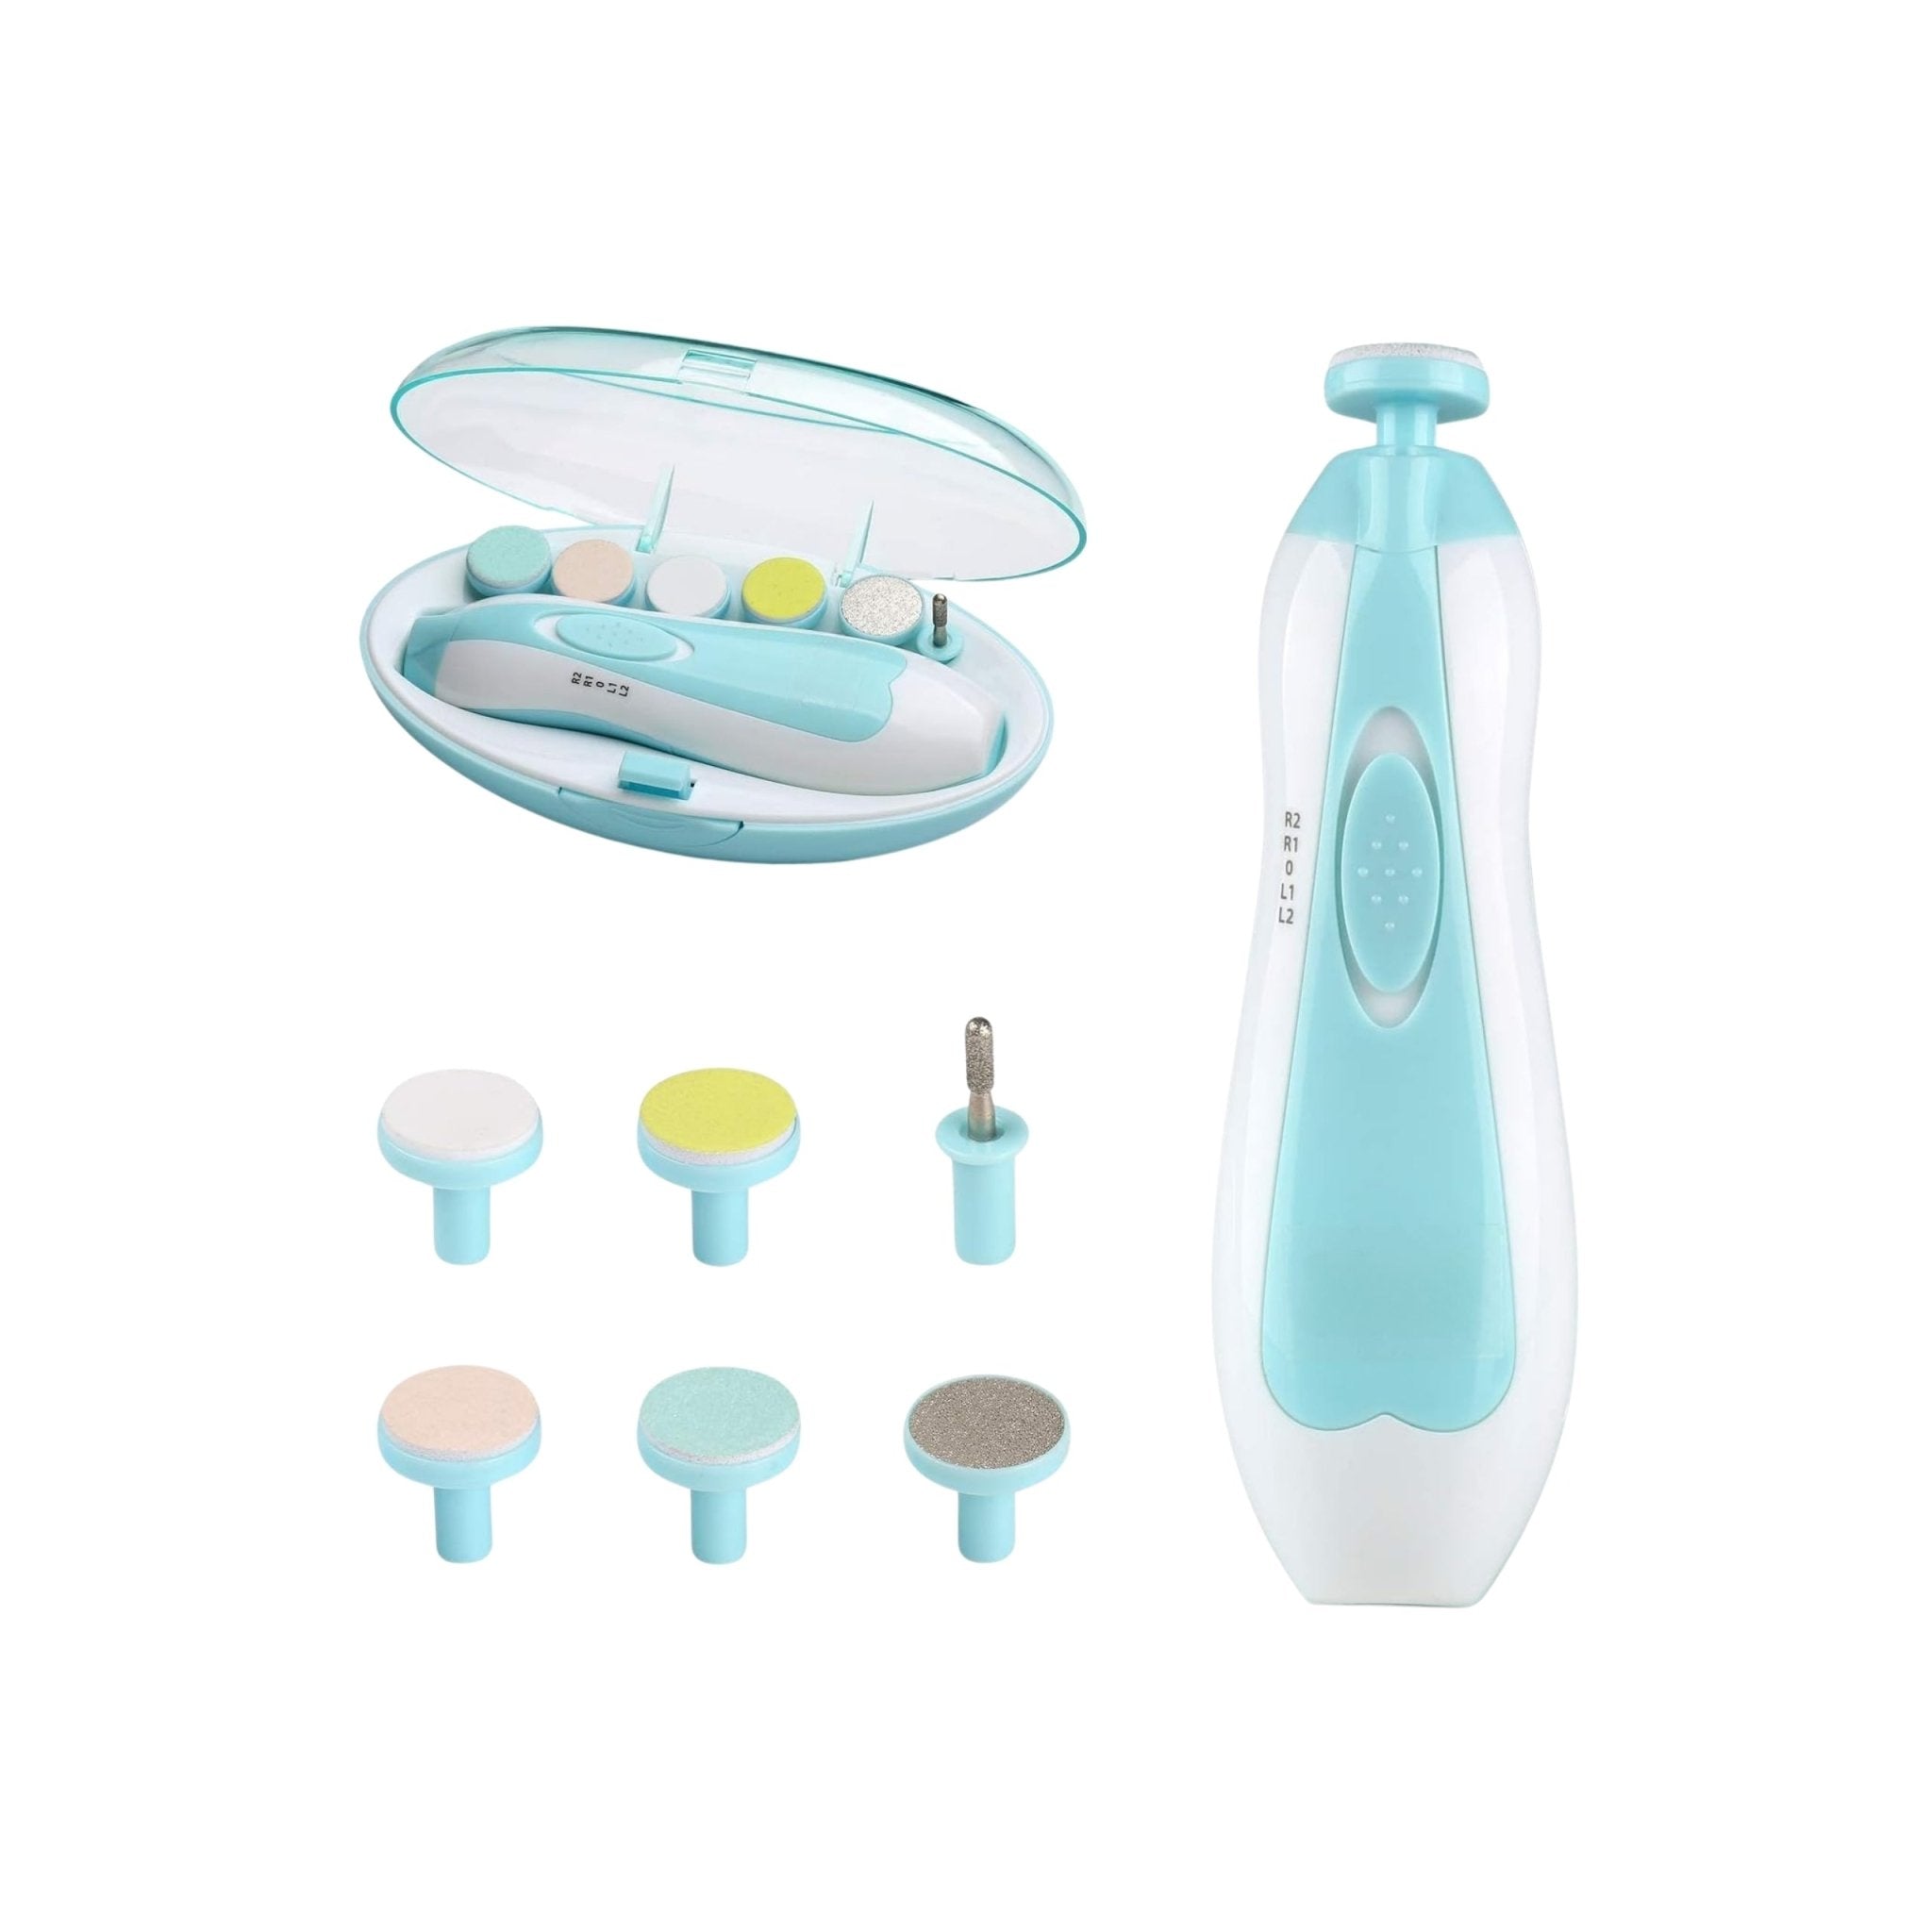 Electric Nail Cutter Baby Nail Infant Tool | eBay